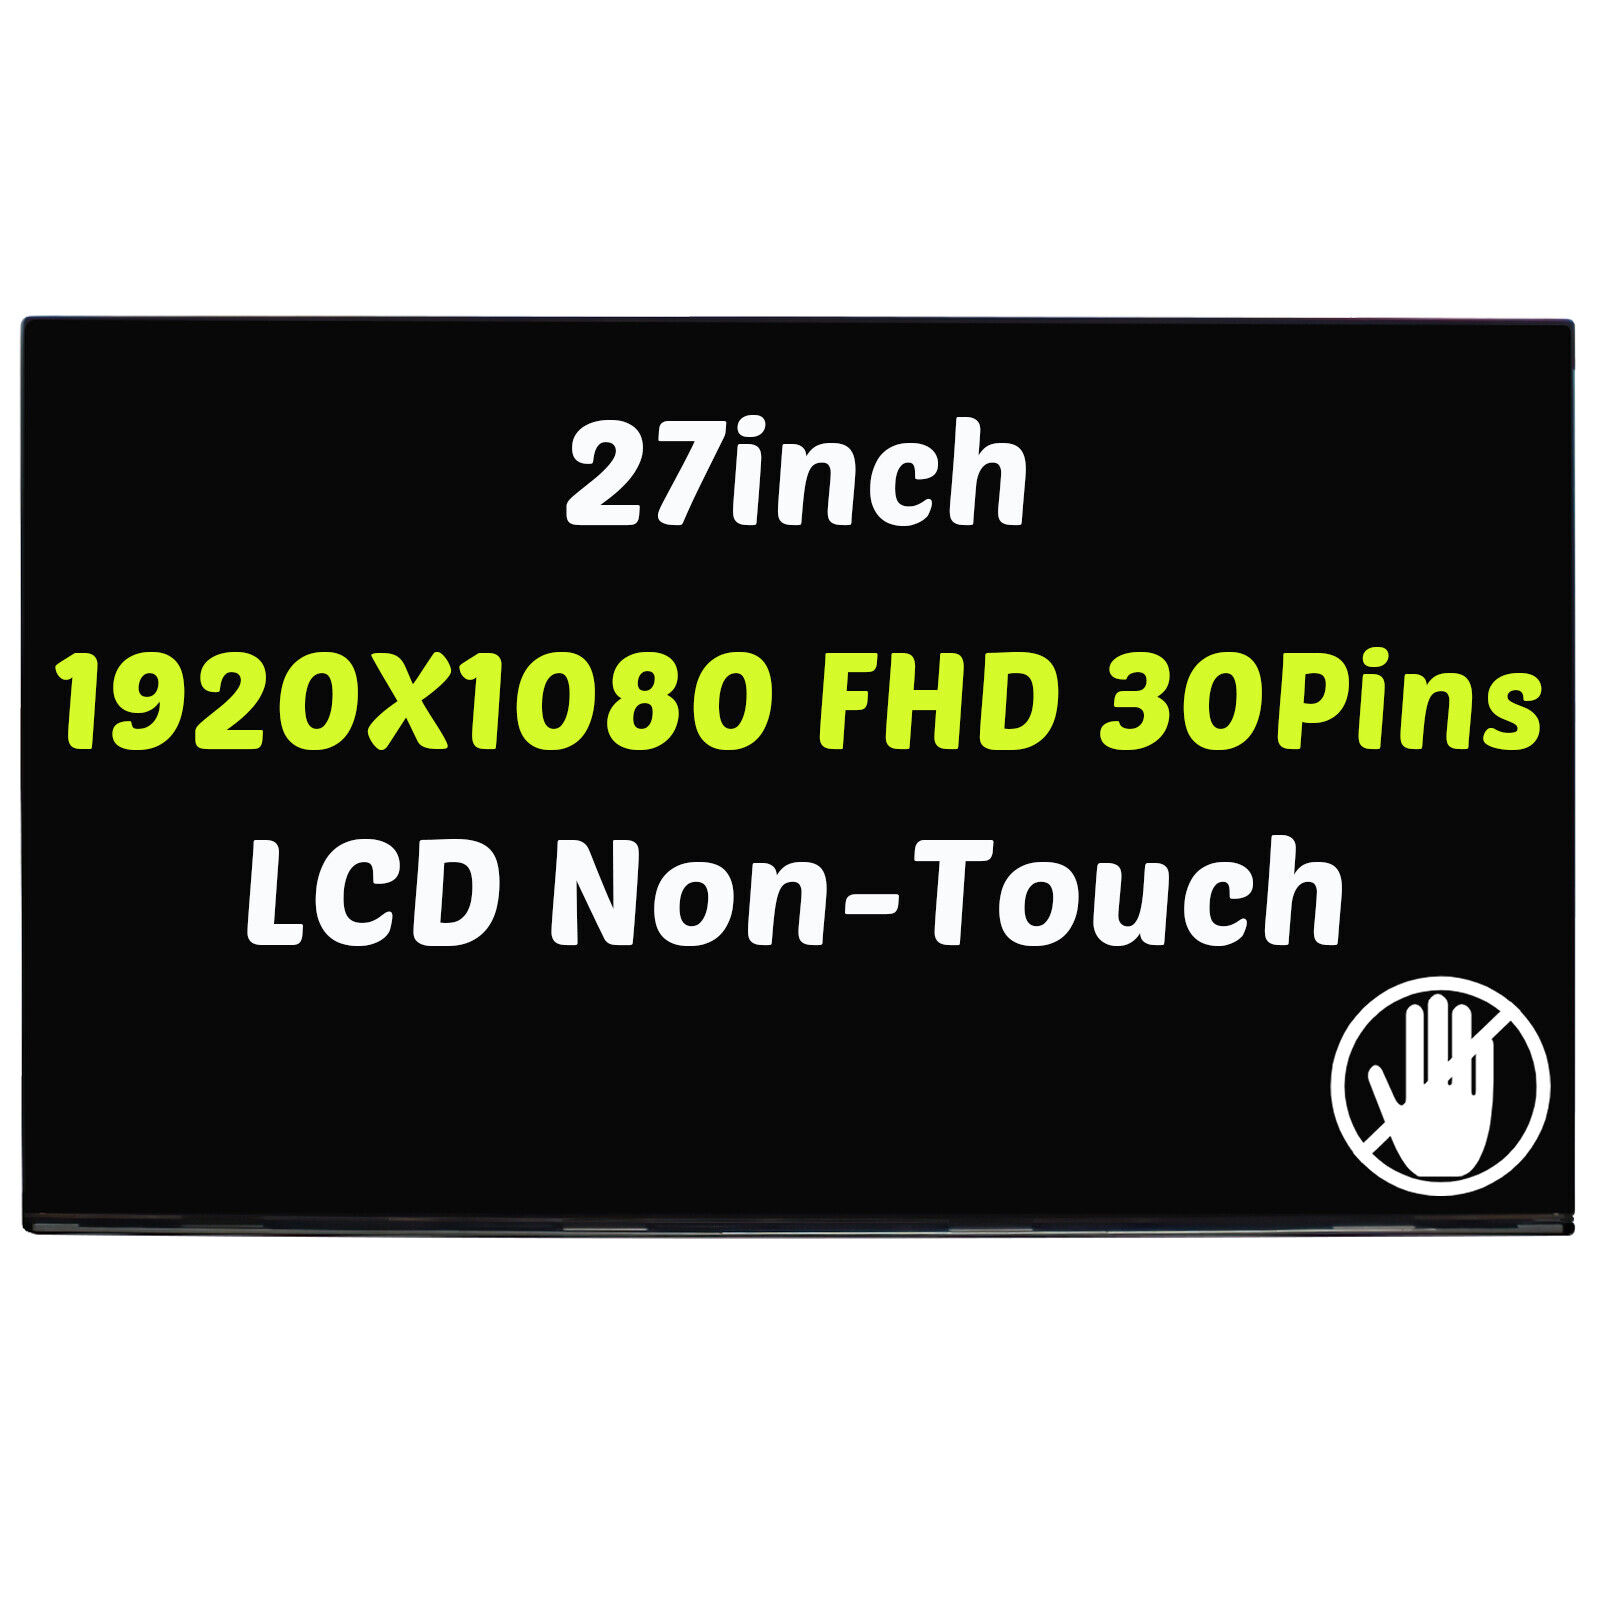 27inch WLED LCD Display FHD 30Pins Non-Touch for HP 27-C 27-CB1027C 27-CB1113W